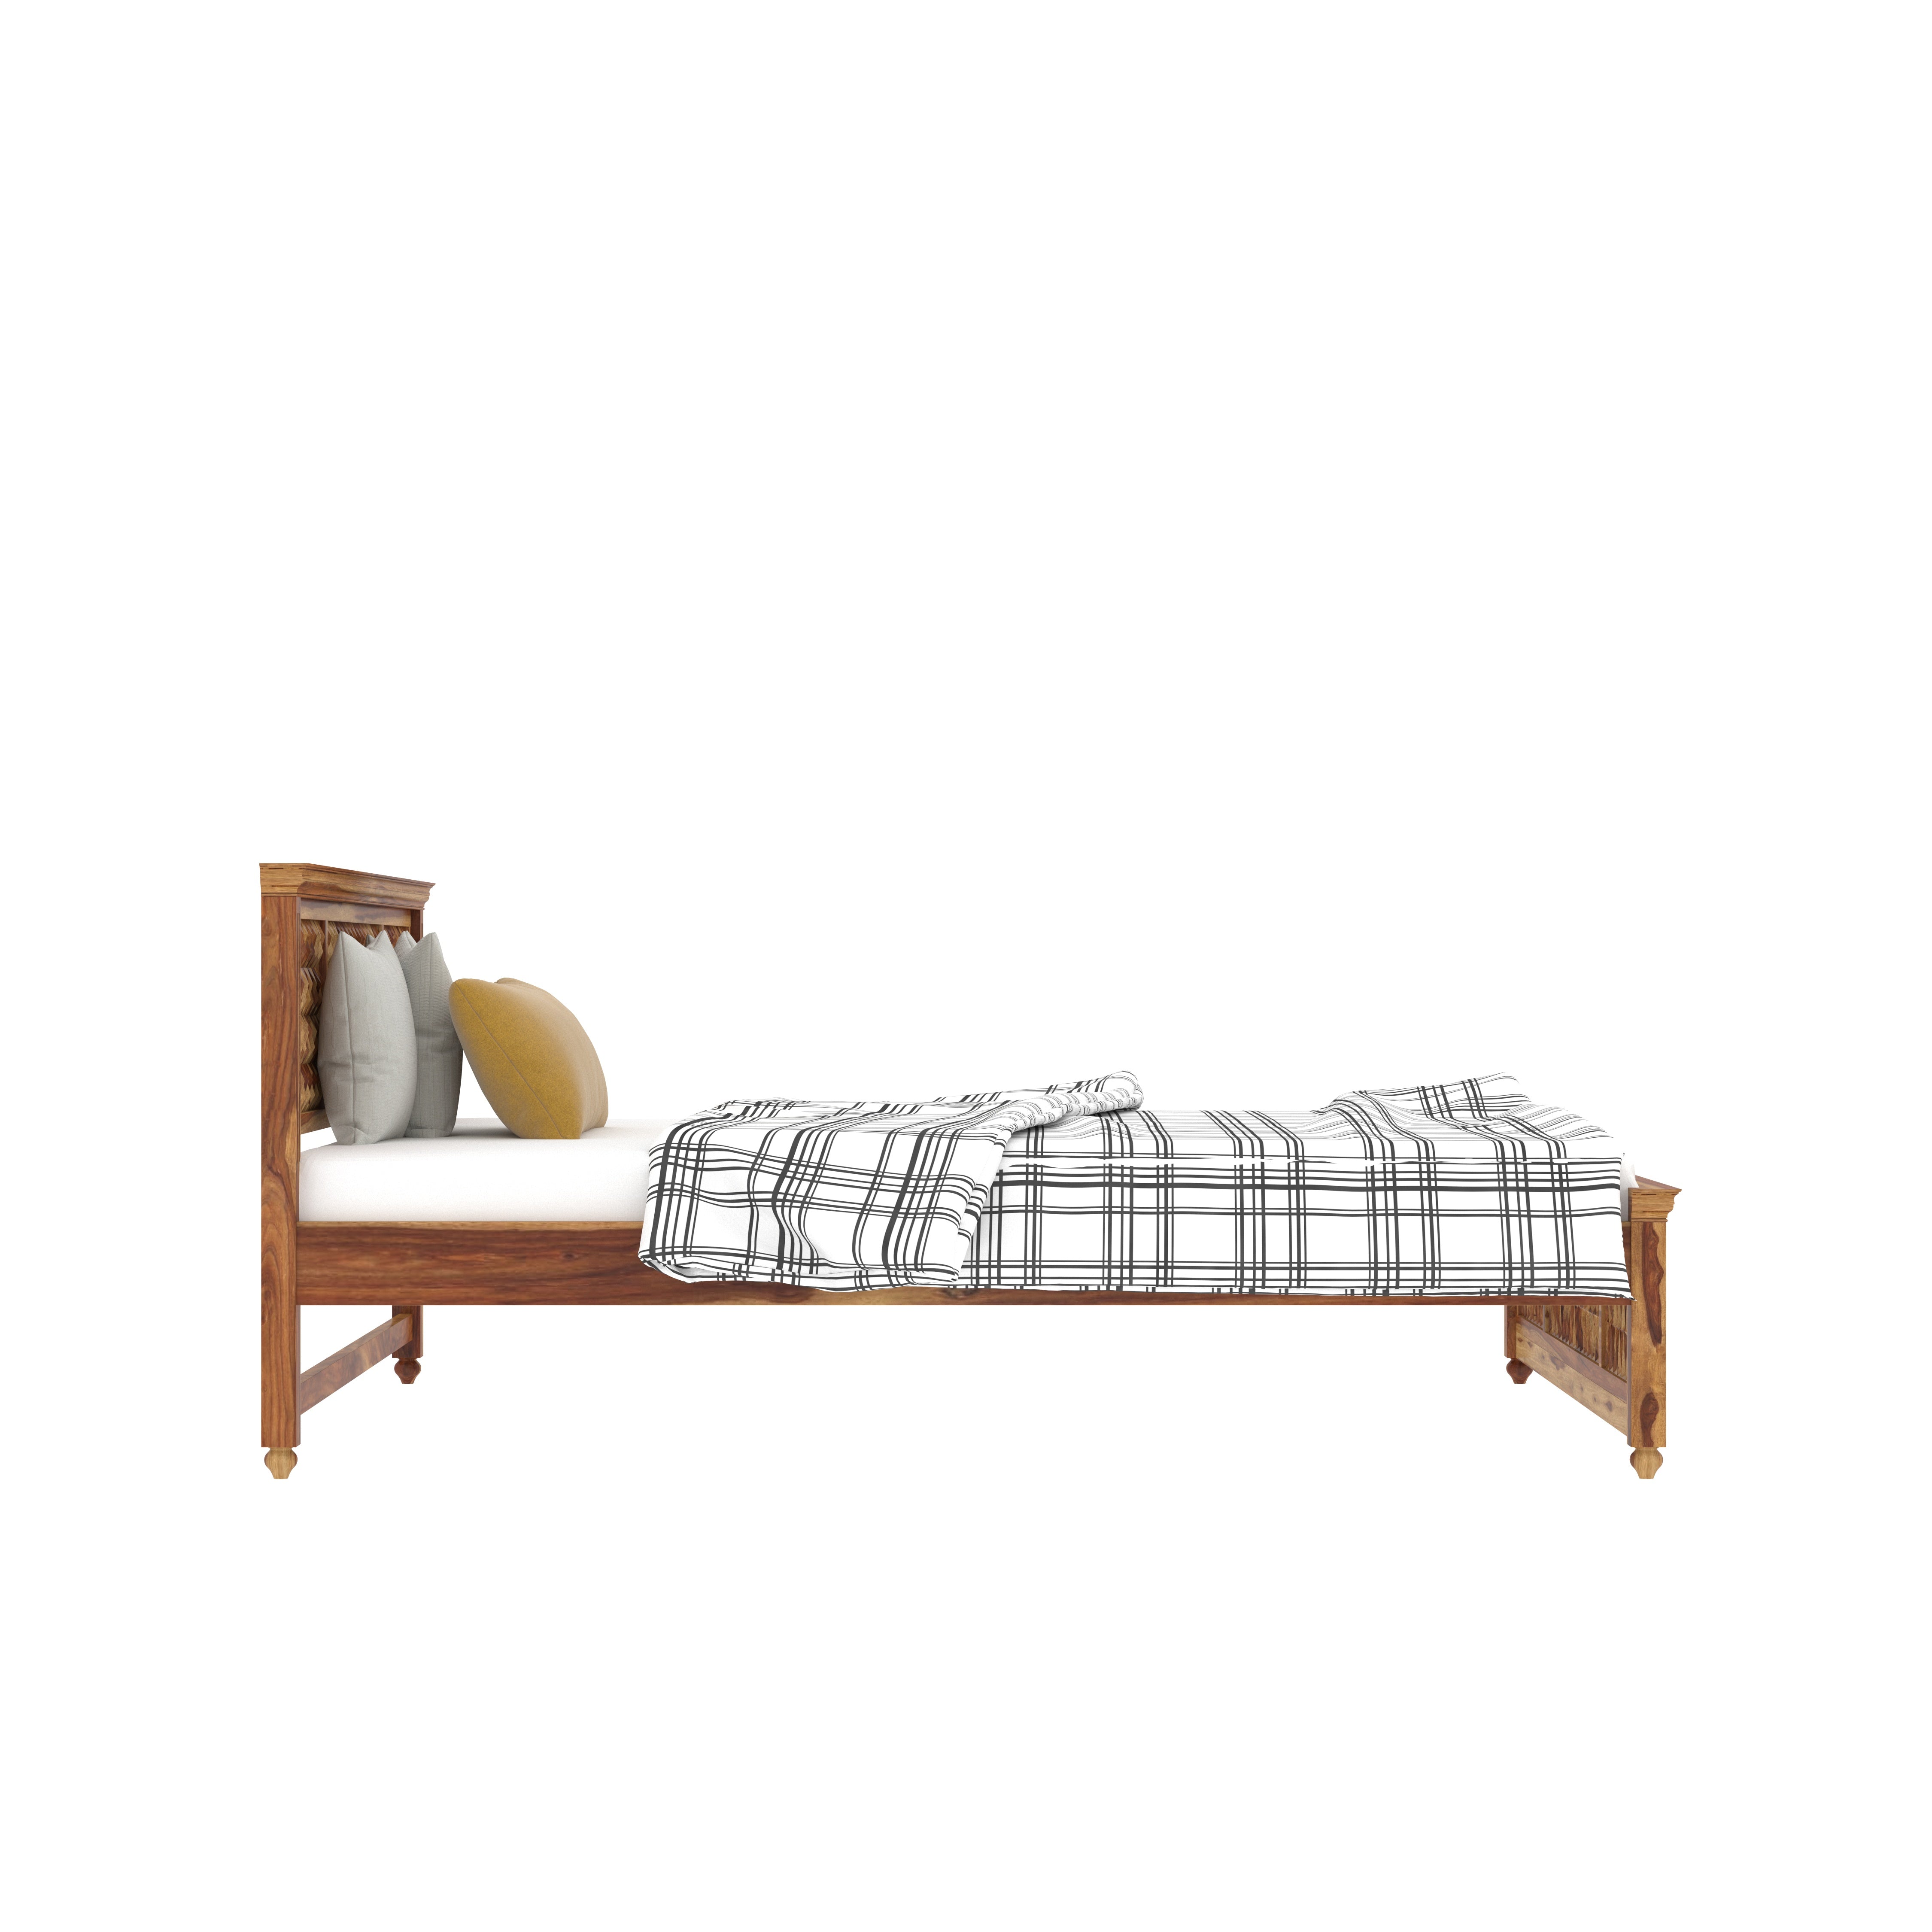 Richard Quality Finished Wooden Handmade Wooden Bed Bed